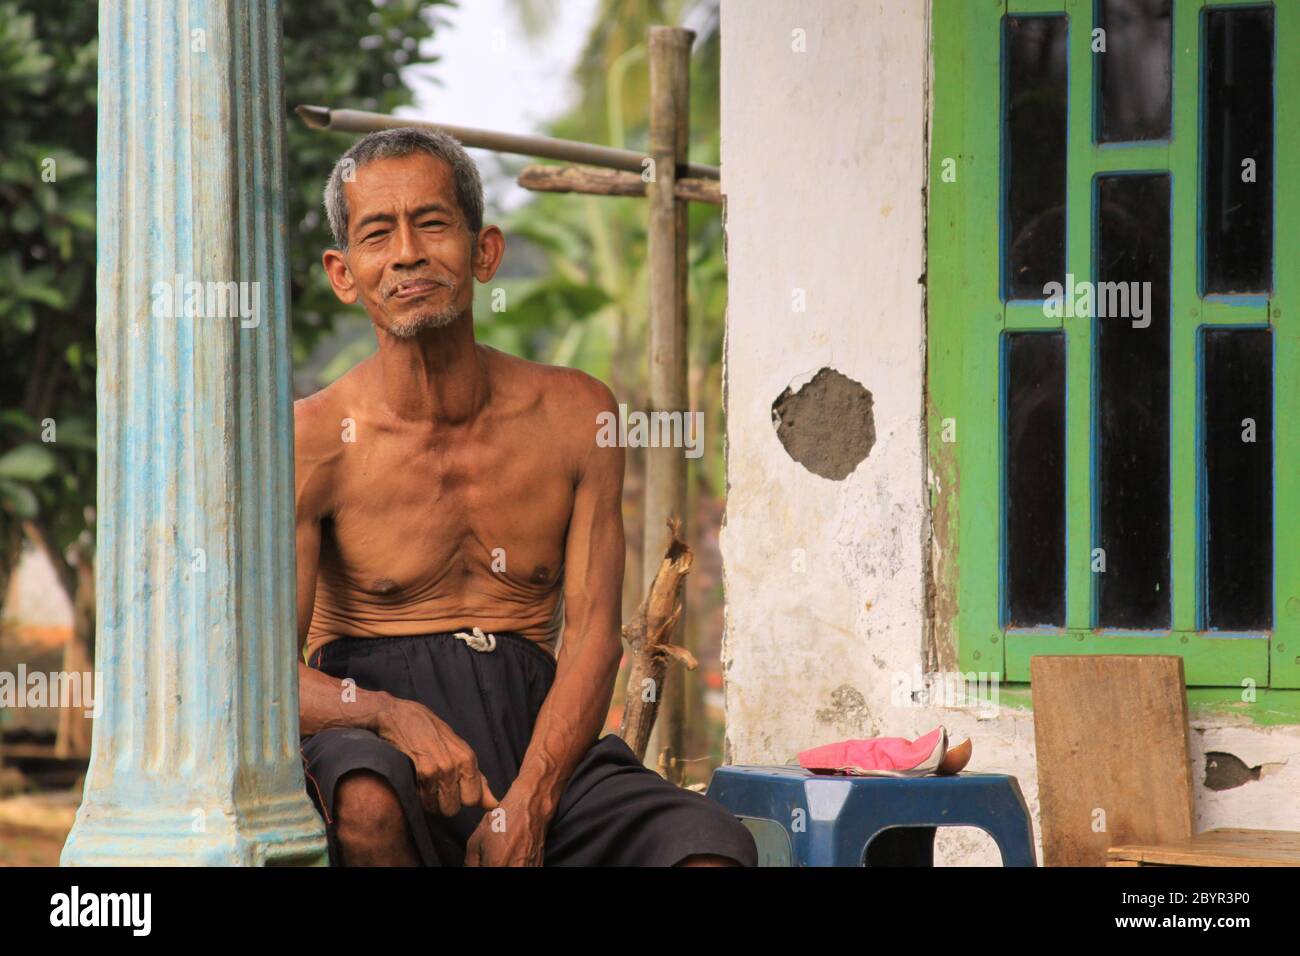 Probolinggo, Indonesia - June 14, 2013: Old Indonesian man on porch of his house in a village in Java. Walking in the countryside of an Indonesian vil Stock Photo